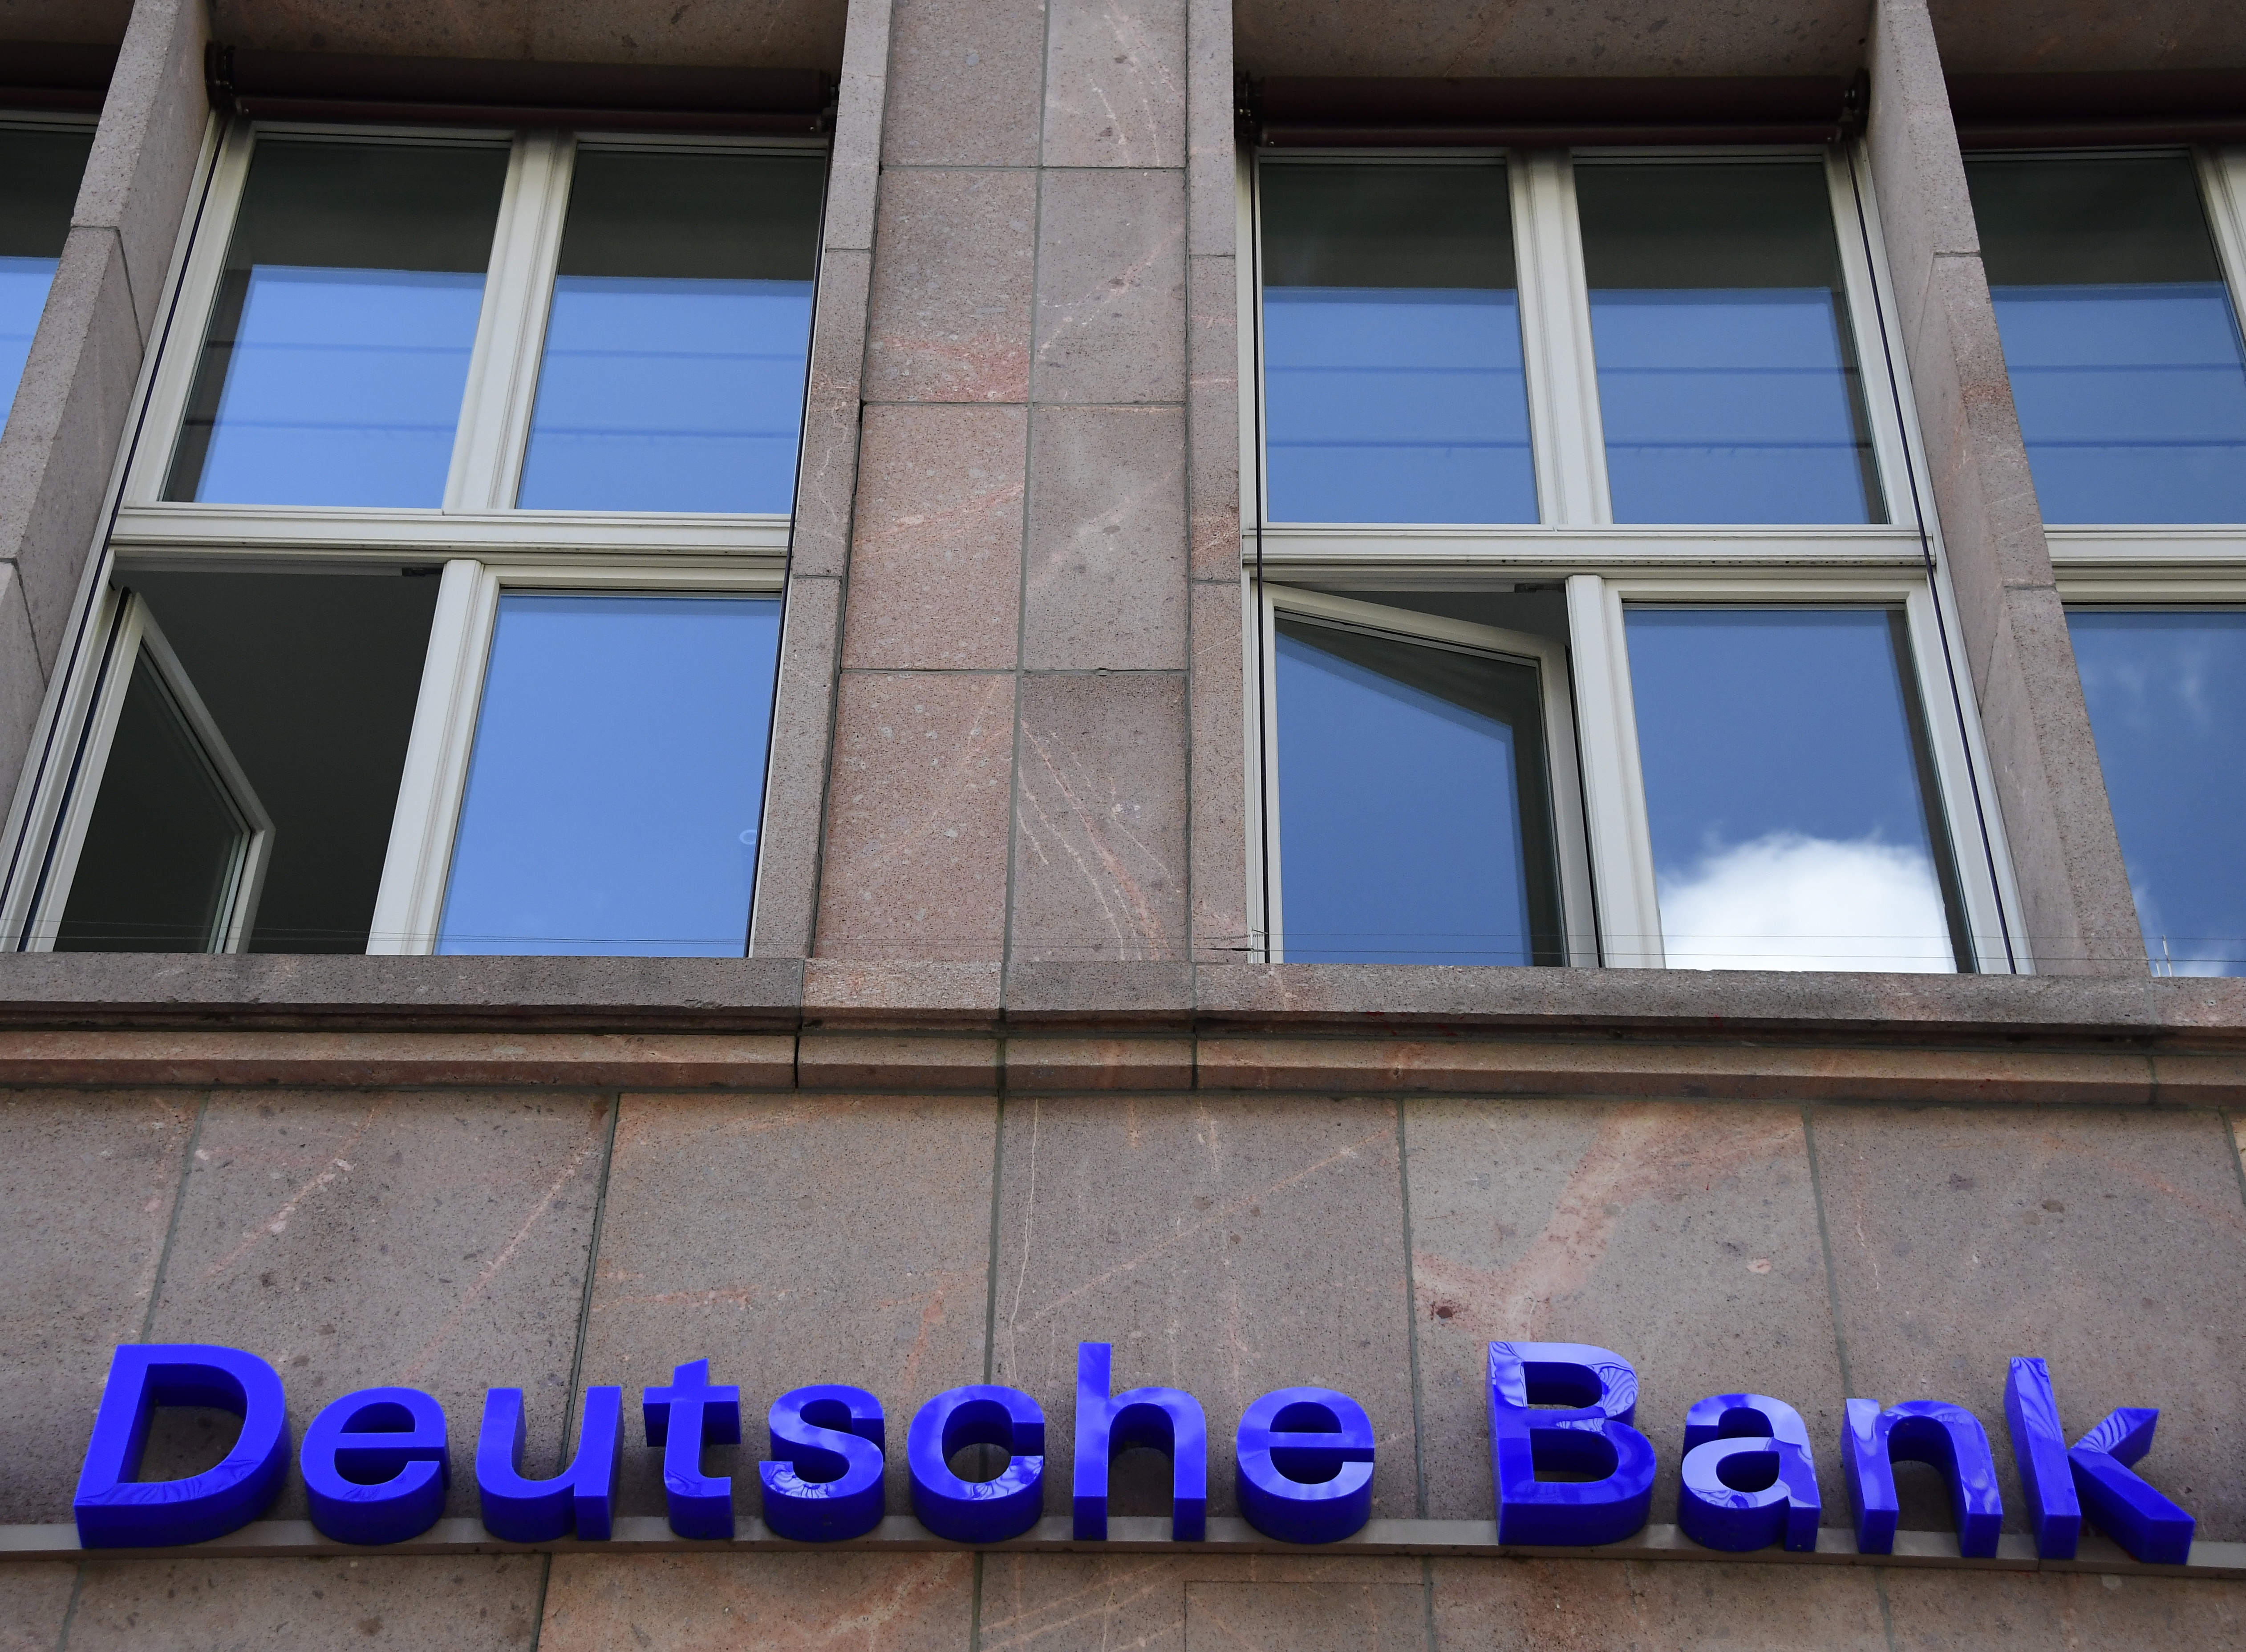 The logo of Germany's biggest lender Deutsche Bank is seen on a branch of the bank in Berlin's Mitte district on September 30, 2016. Shares in Deutsche Bank plummeted on the Frankfurt stock market, dragging other European banks and global markets down with it, after reports some customers were pulling money out. / AFP PHOTO / TOBIAS SCHWARZ